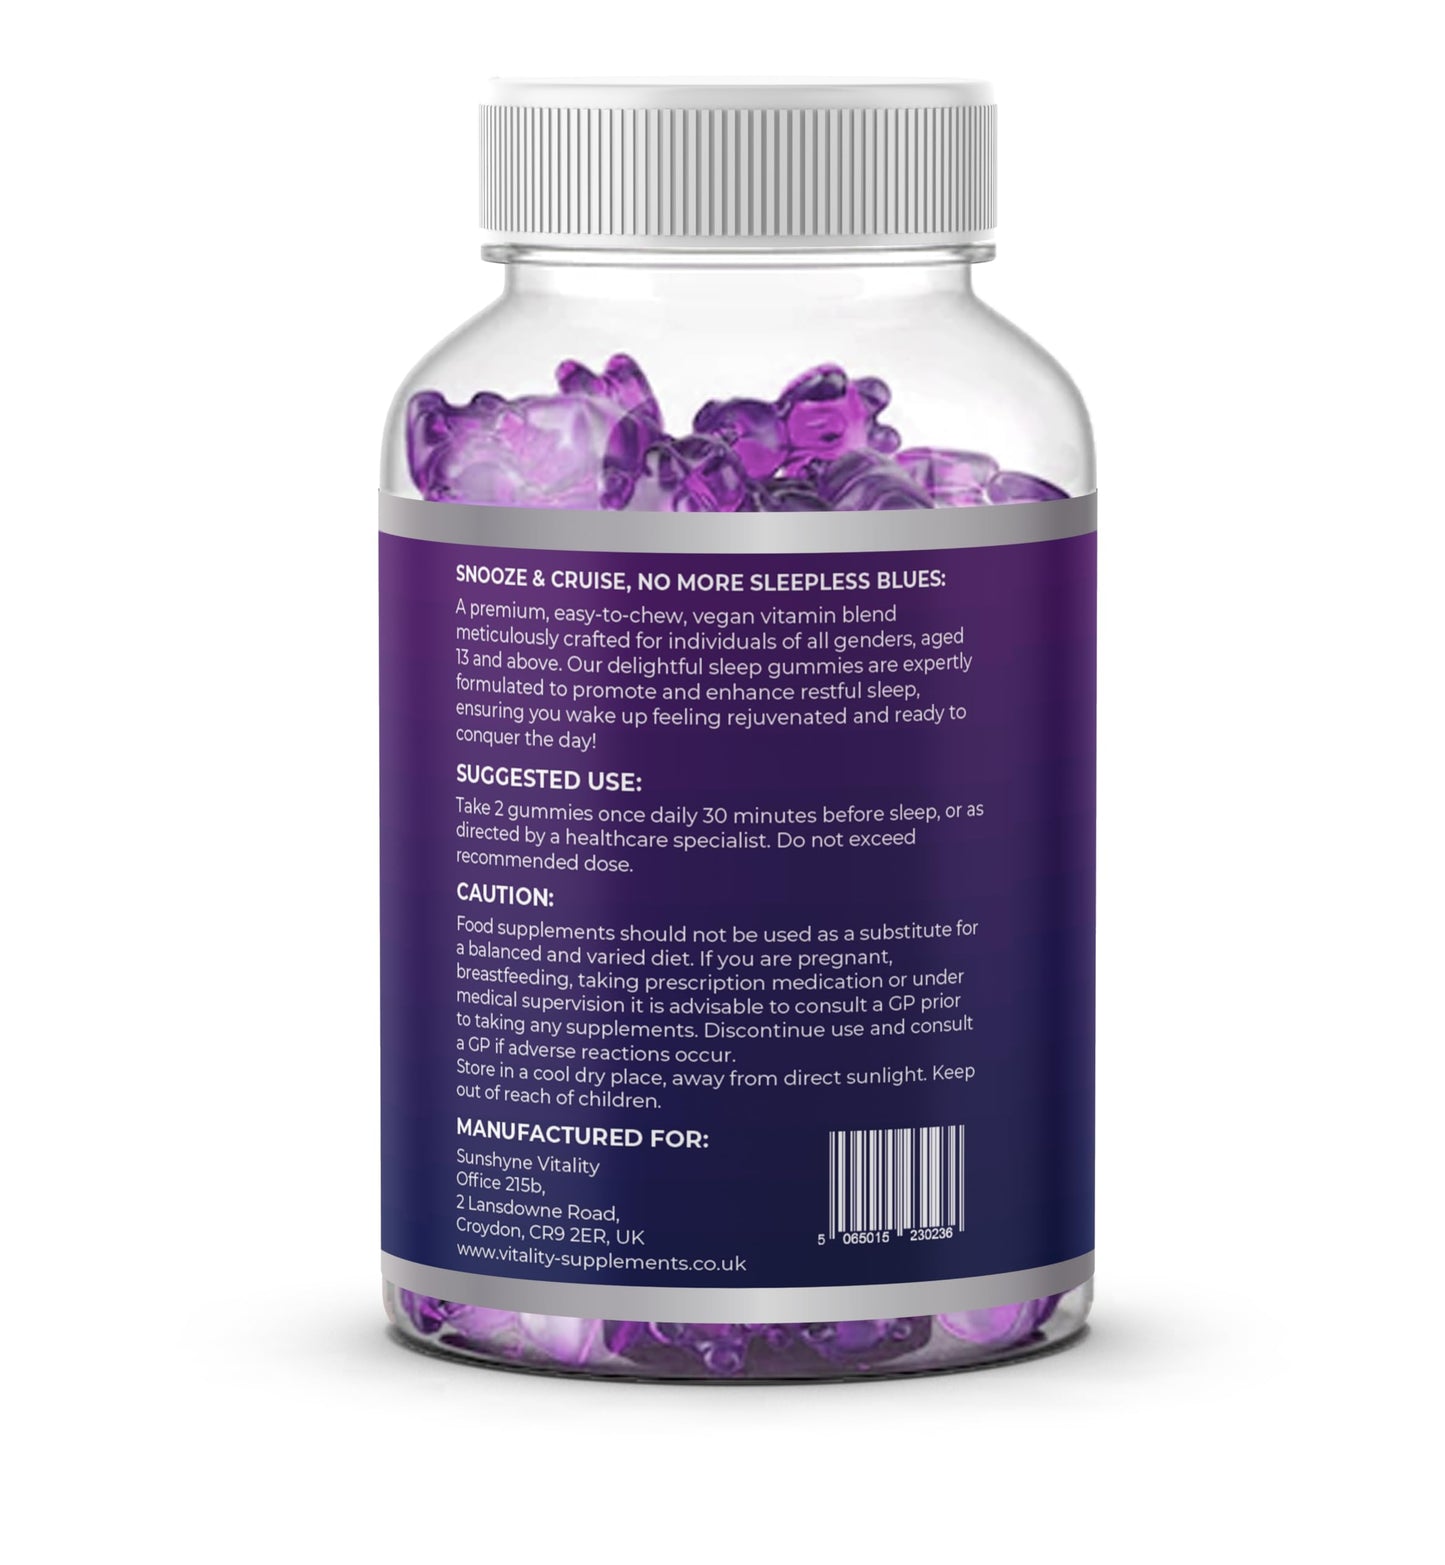 Natural Sleep Aid Gummies with Valerian Root & L-Theanine - Non-Habit Forming, Vegan, for Deep Relaxation & Restful Nights - 60 Chewable Gummies